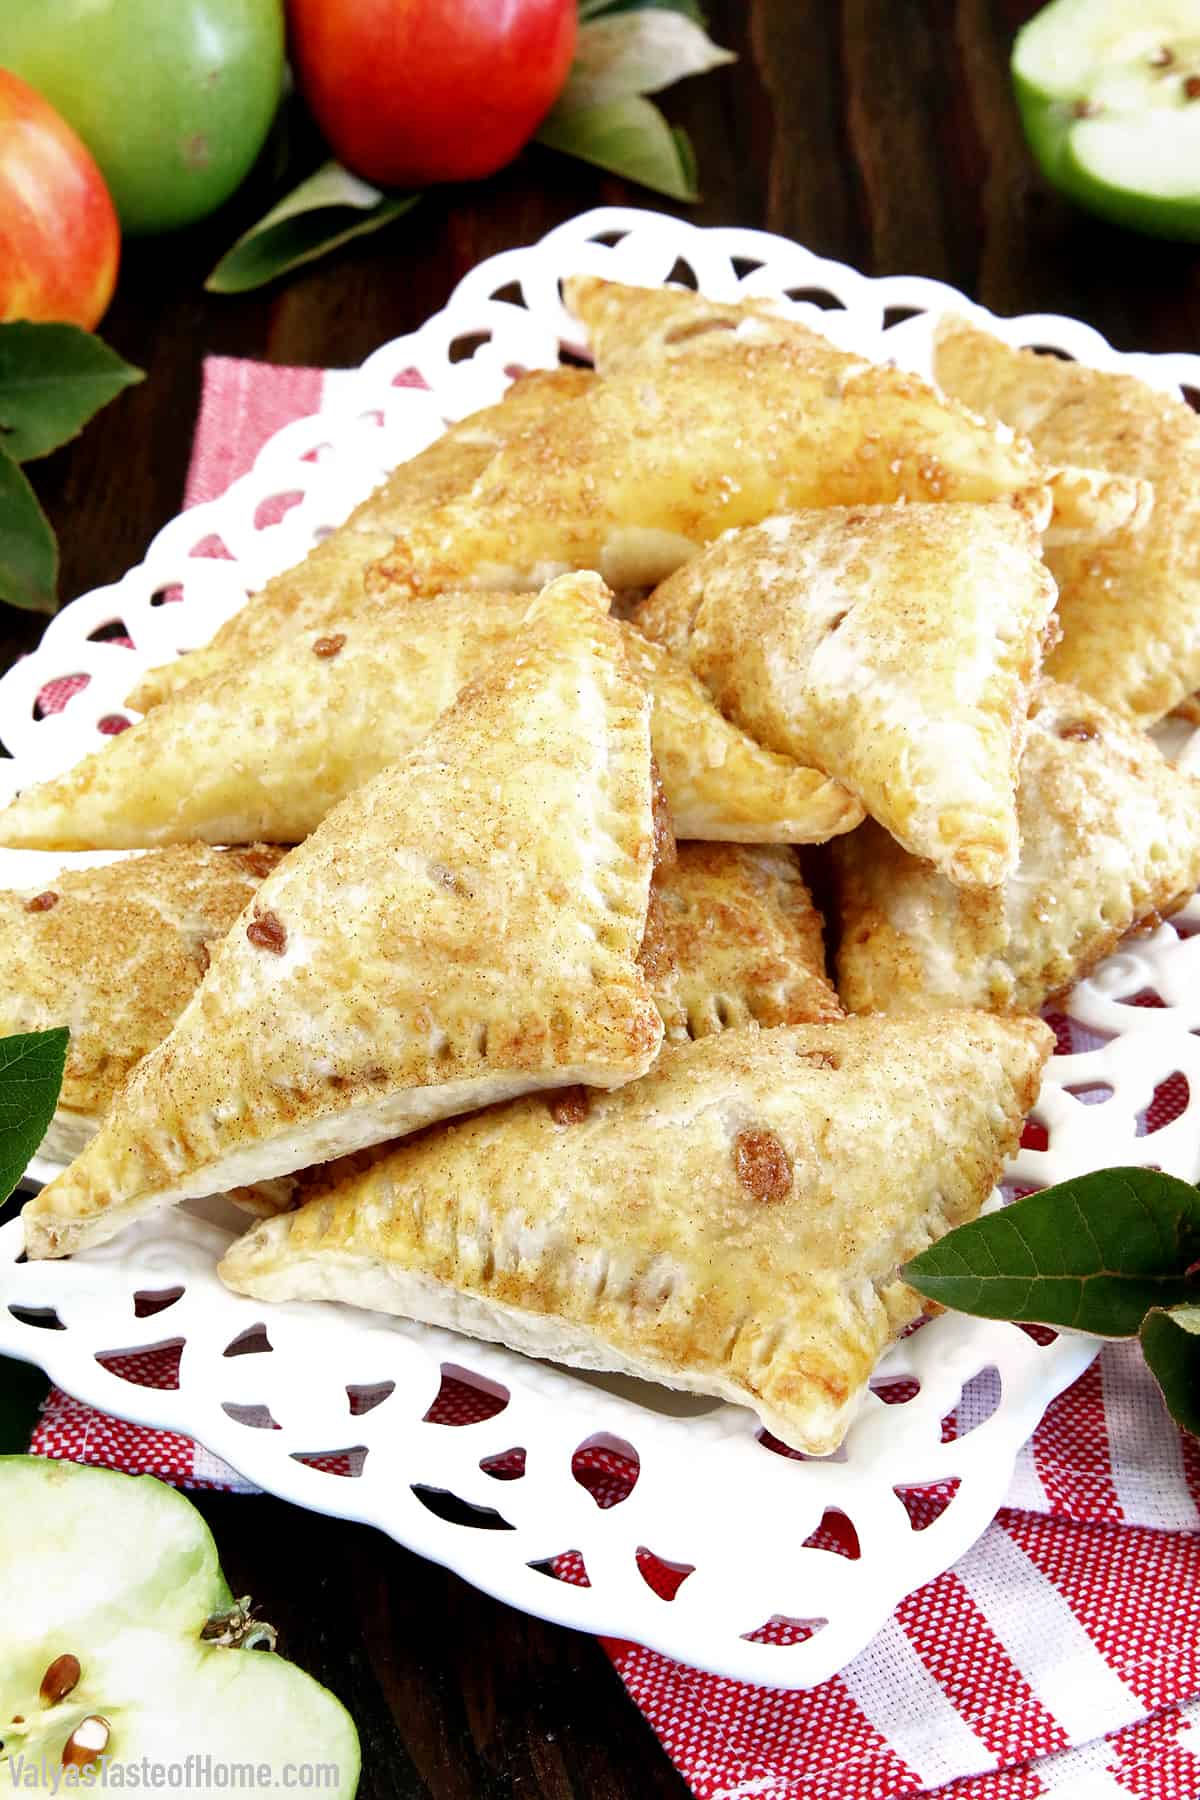 IMG 4836 Who loves quick and easy apple desserts? These Easy Puff Pastry Cinnamon Apple Turnovers are absolutely irresistible and as easy as can be. With the delicious cinnamon-apple pie flavors and quick mess-free grab-and-go convenience, what's not to like?